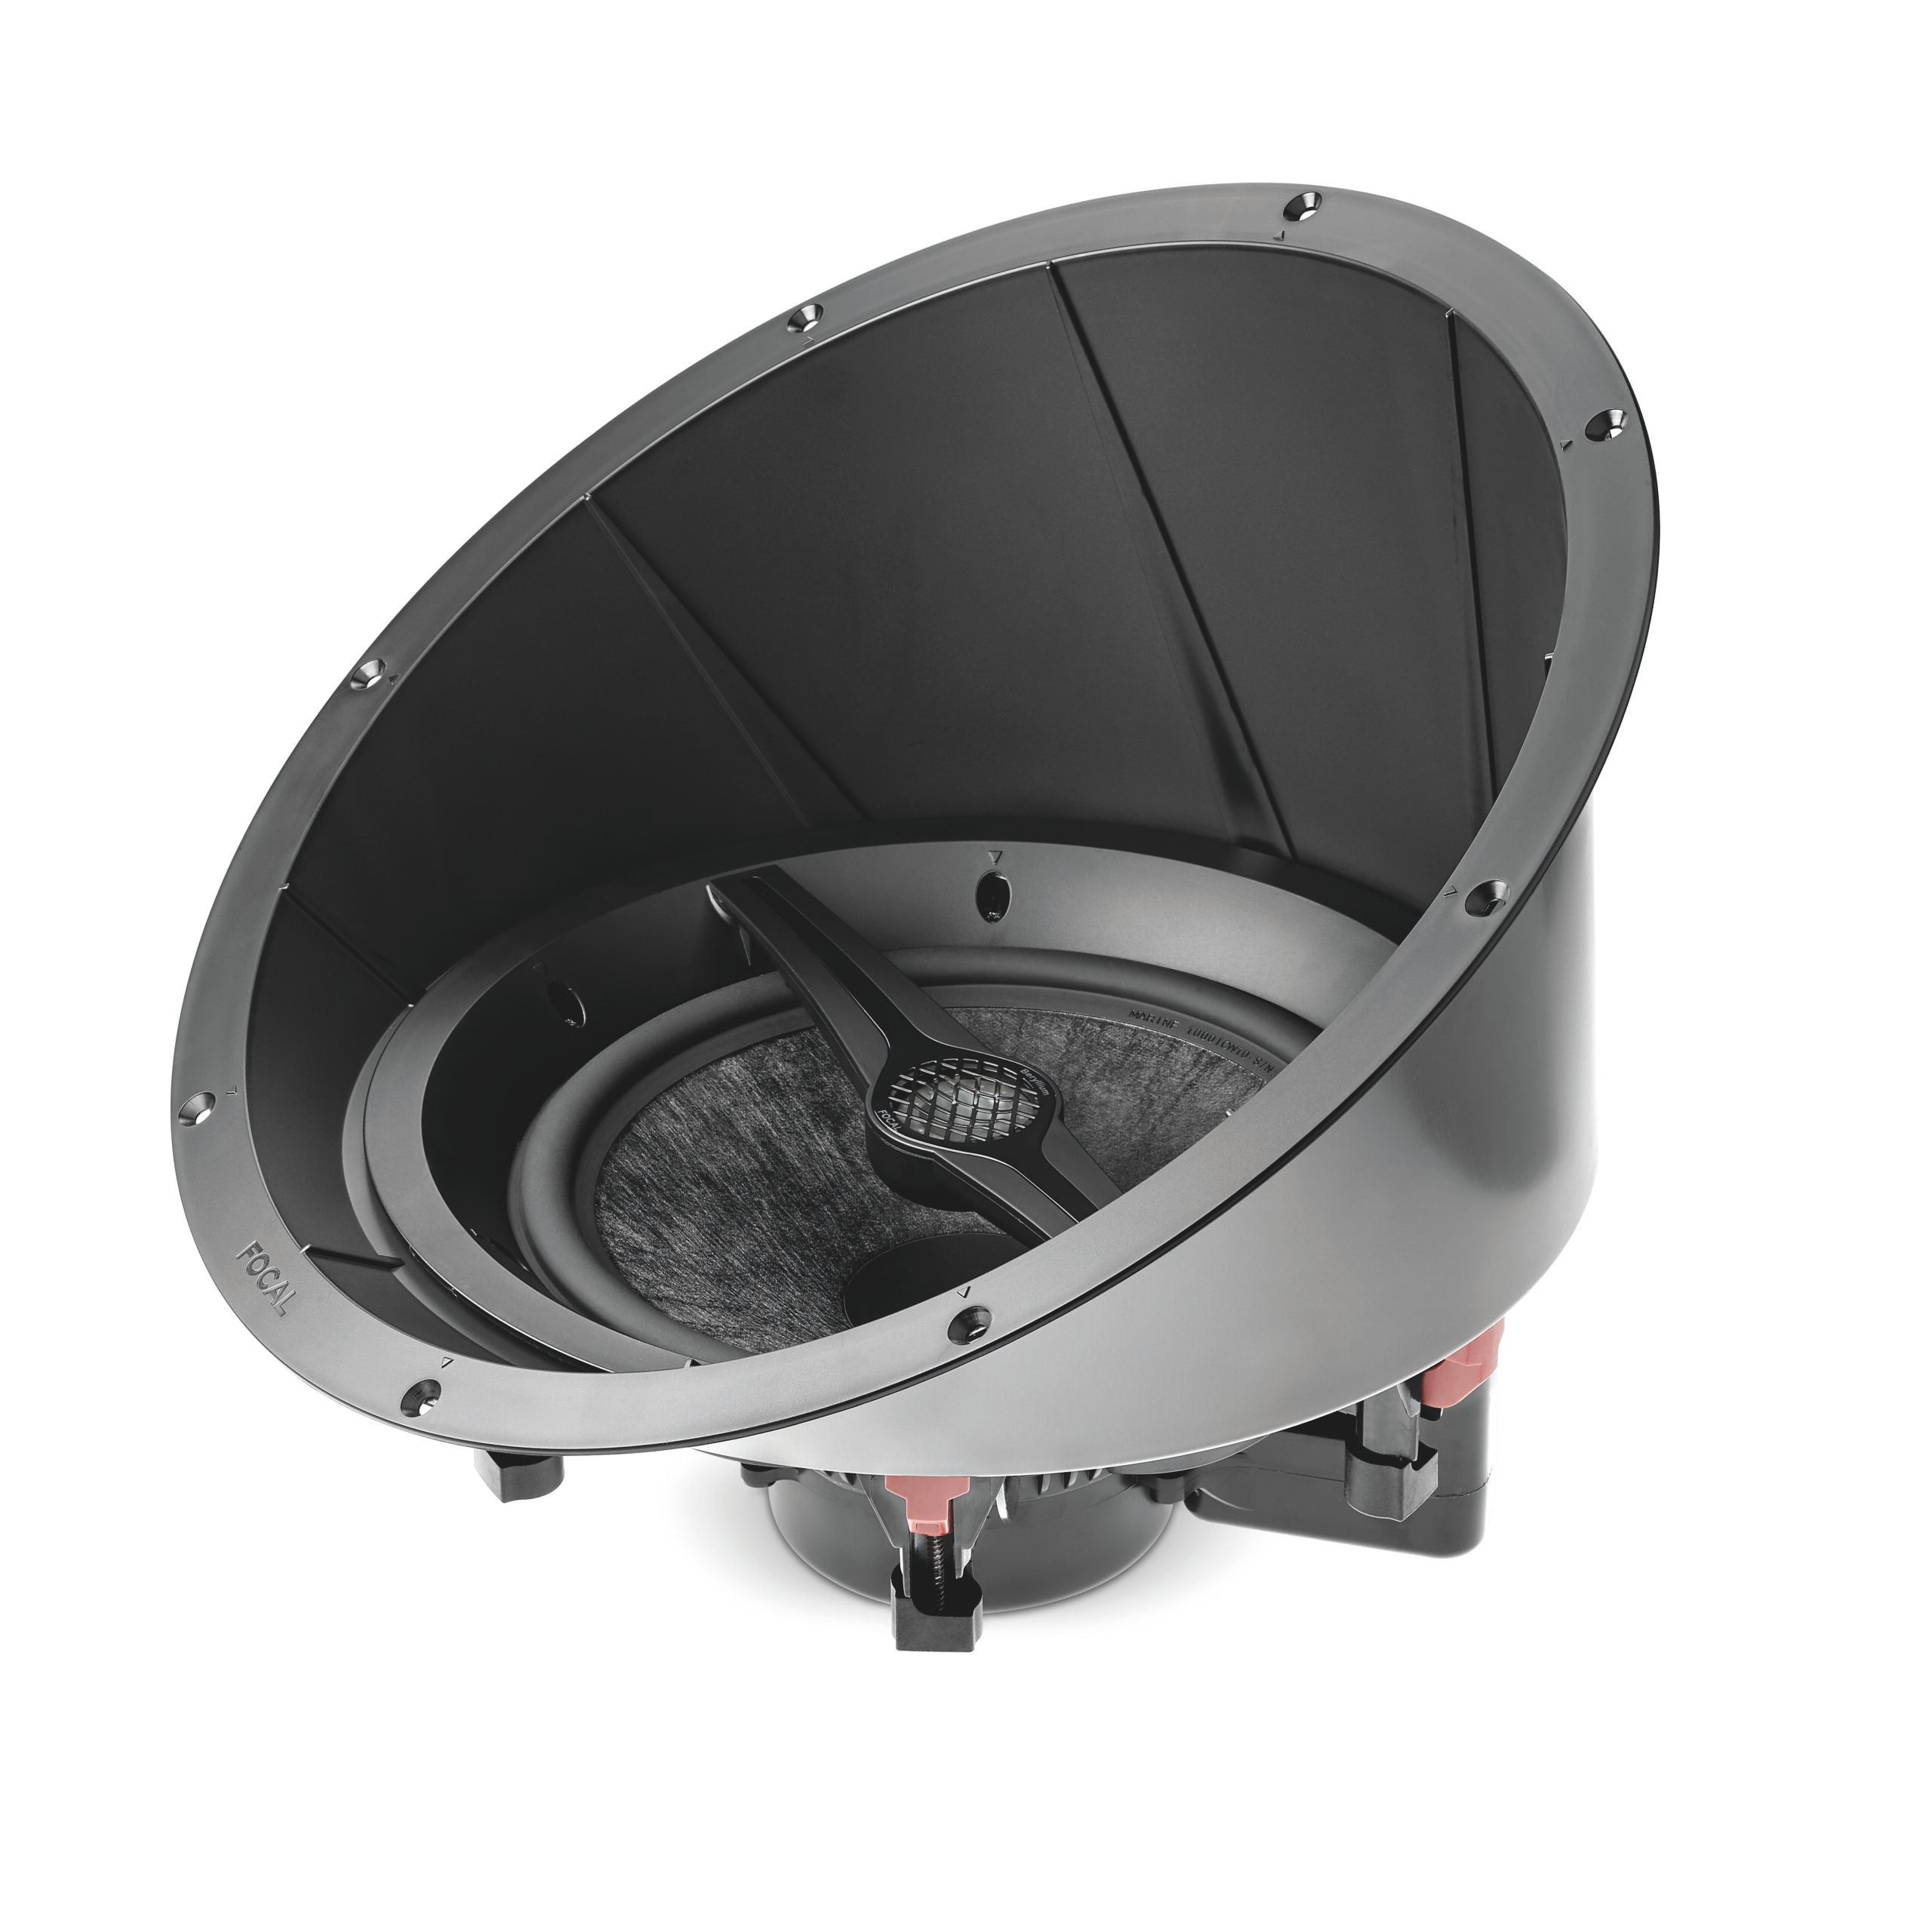 Focal's newest speaker line is designed for demanding saltwater environments, and include both full range and subwoofer models. 4c9b0905 1000 icw10 support incll 34 face scaled